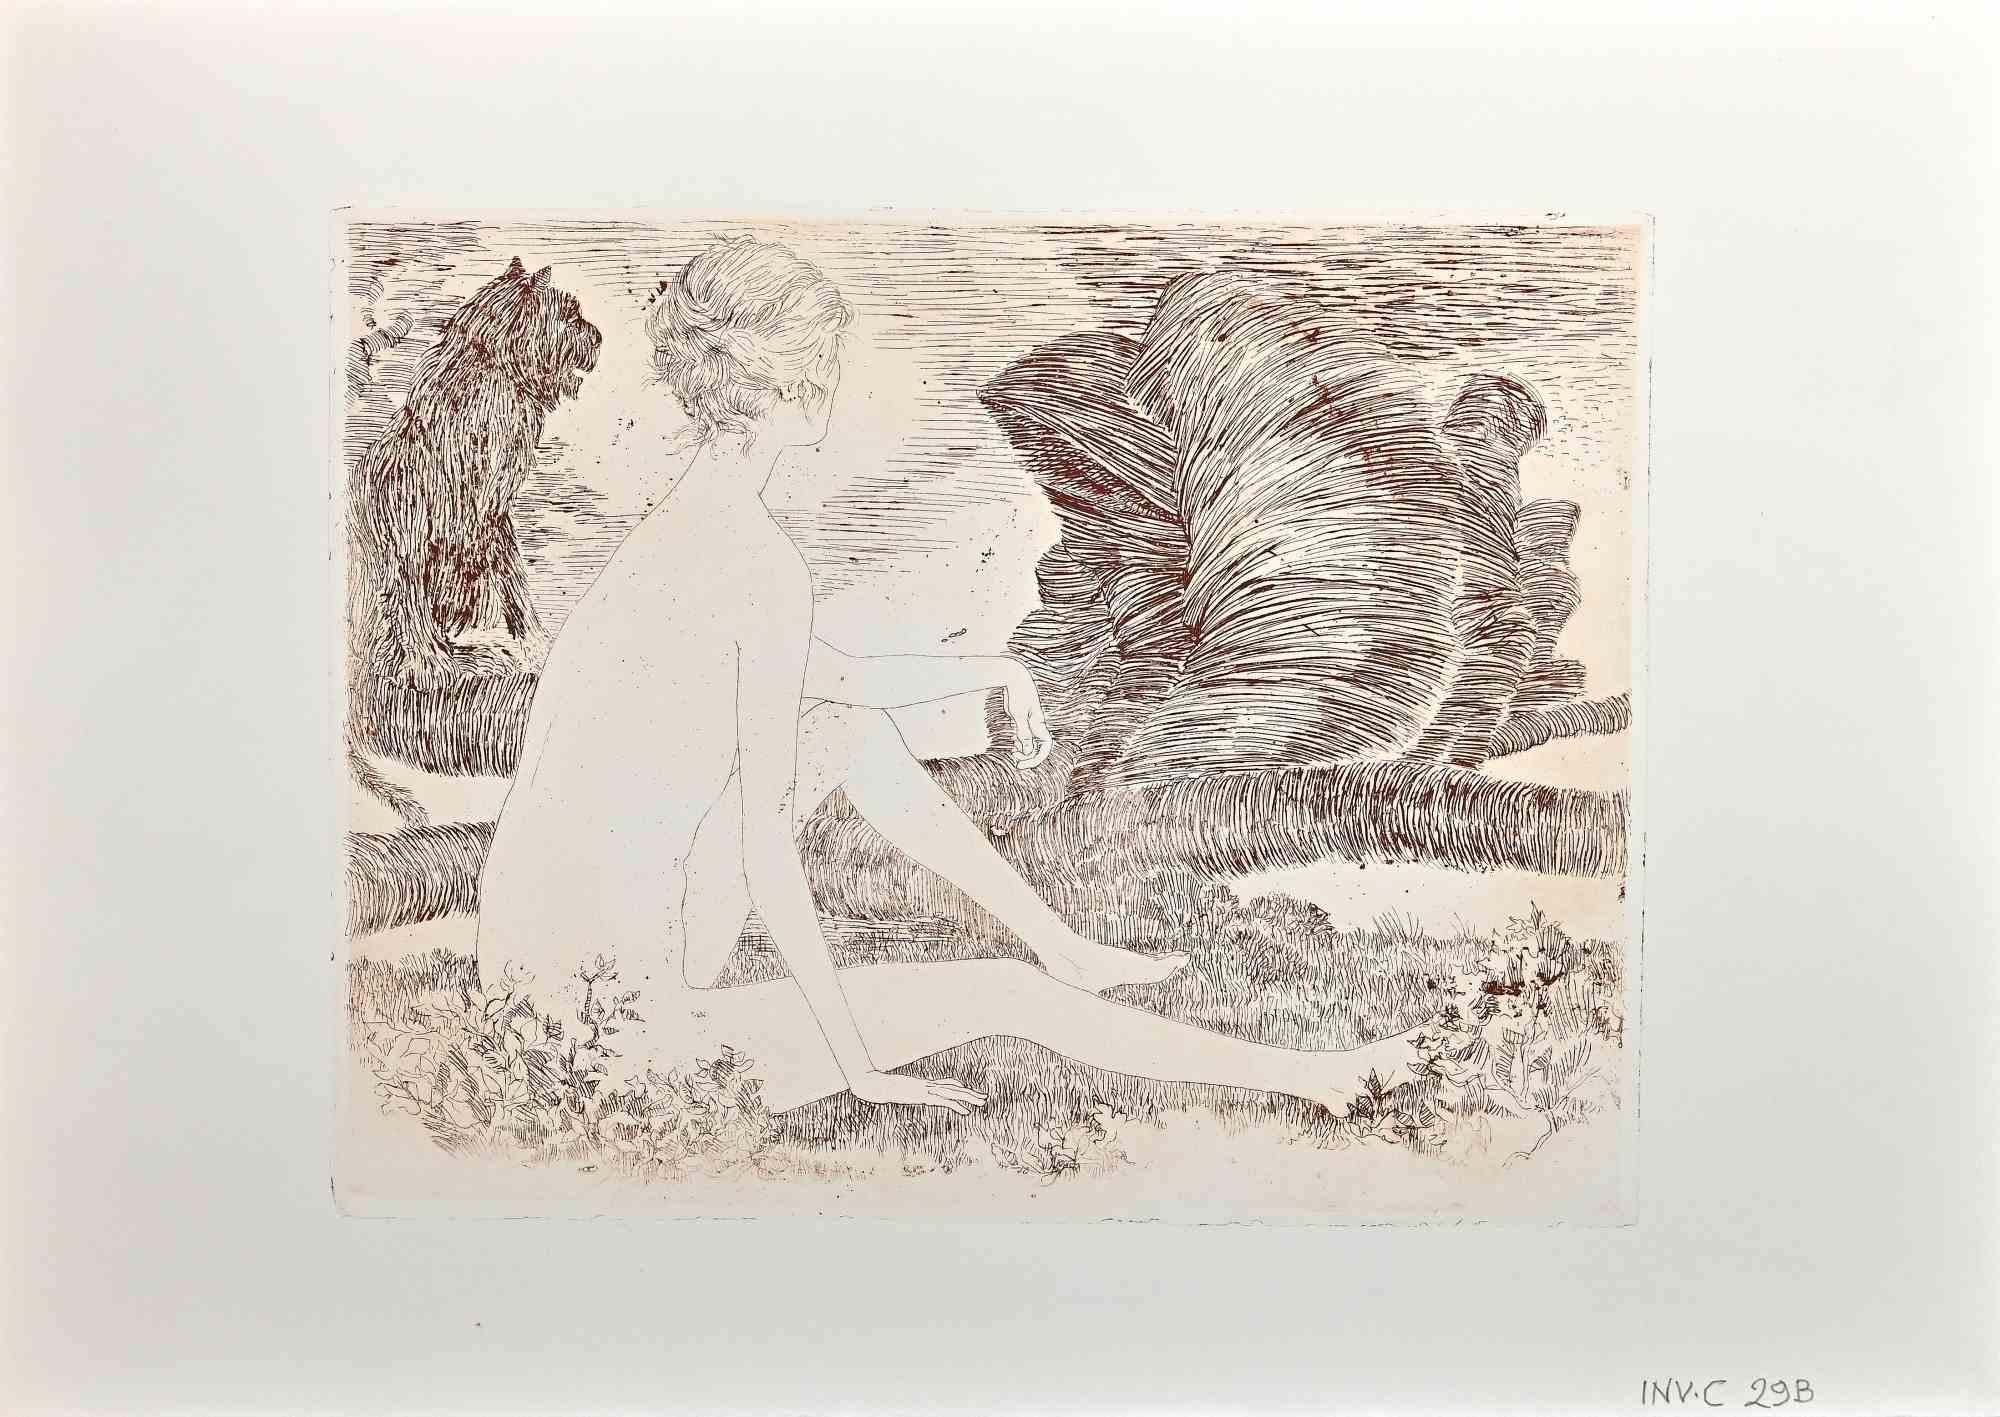 Nude of Woman is an Etching realized by Leo Guida in 1971s.

Good condition, proof artist.

No signature.

Artist sensitive to current issues, artistic movements and historical techniques, Leo Guida has been able to weave a productive interview on